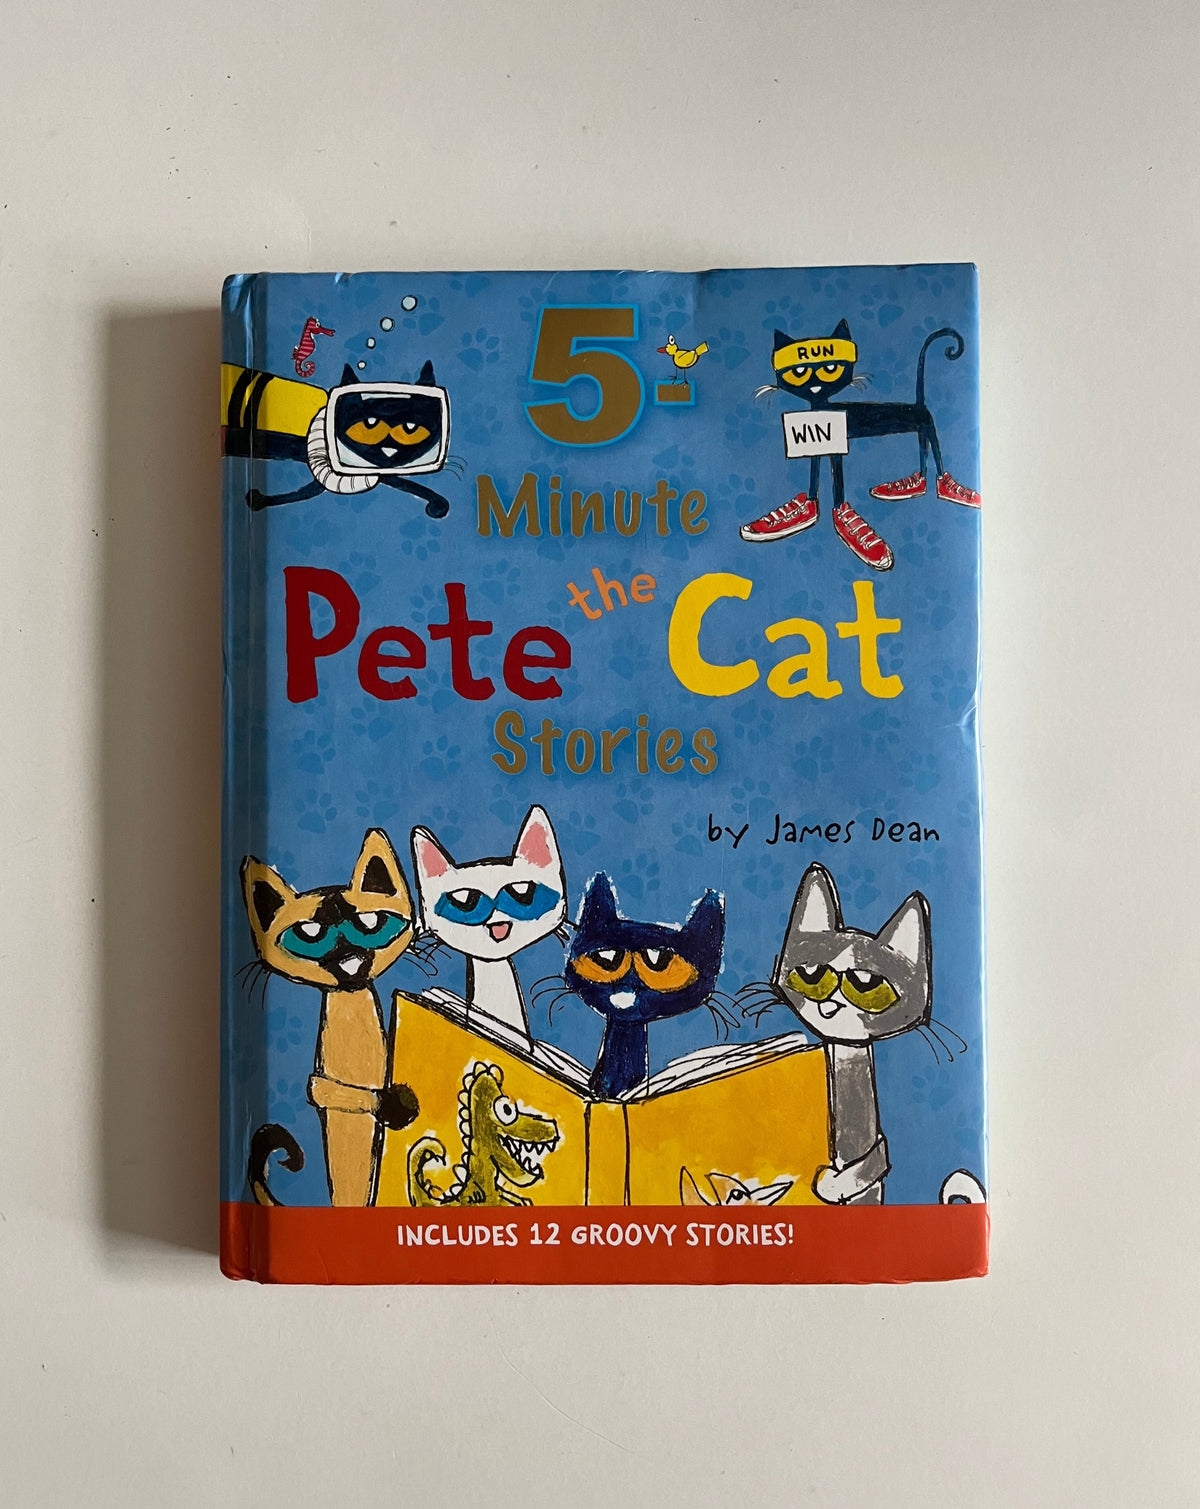 5 Minute Pete the Cat Stories by James Dean